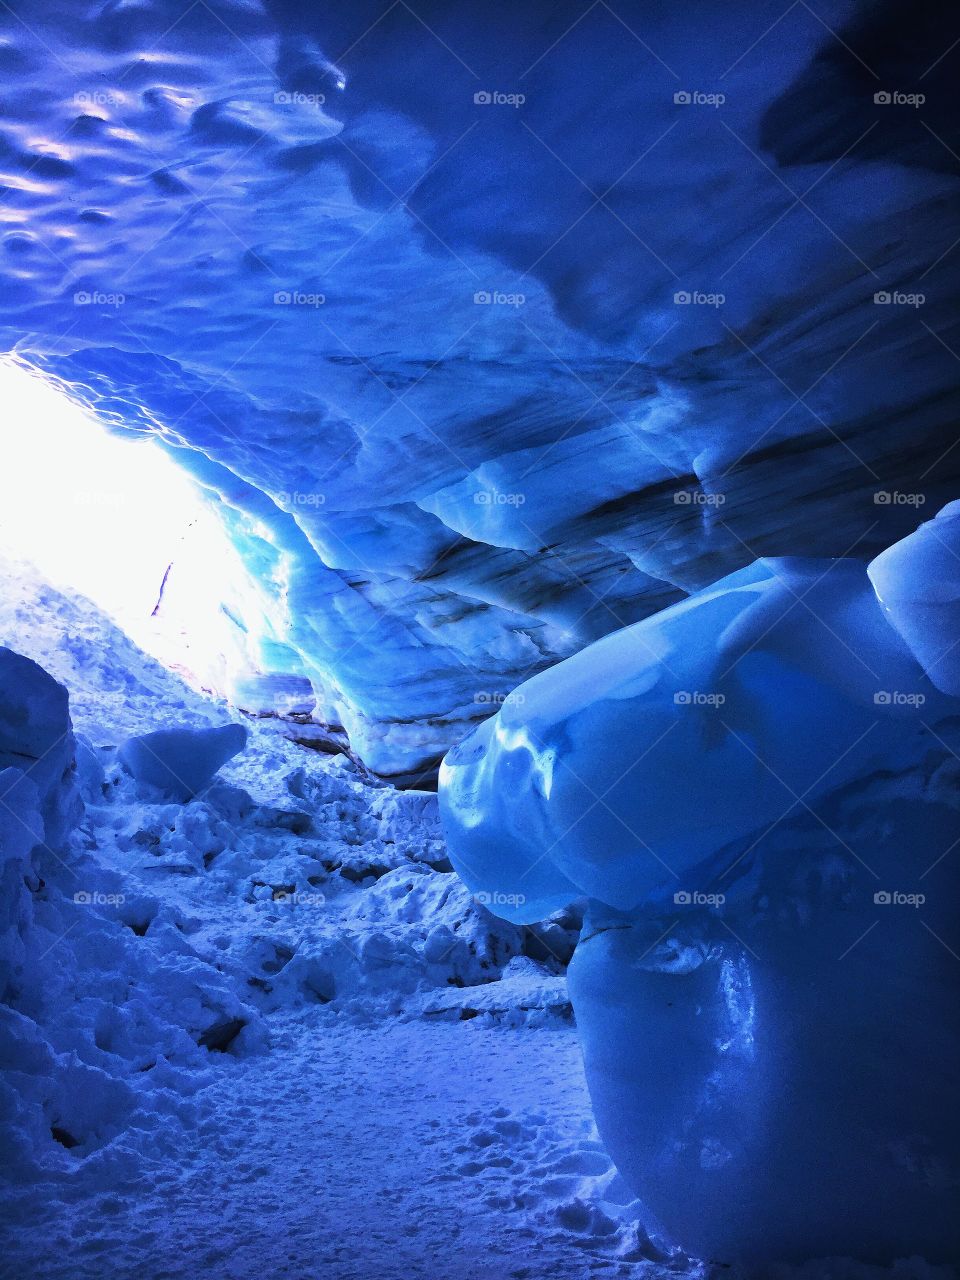 2000 year old ice cave